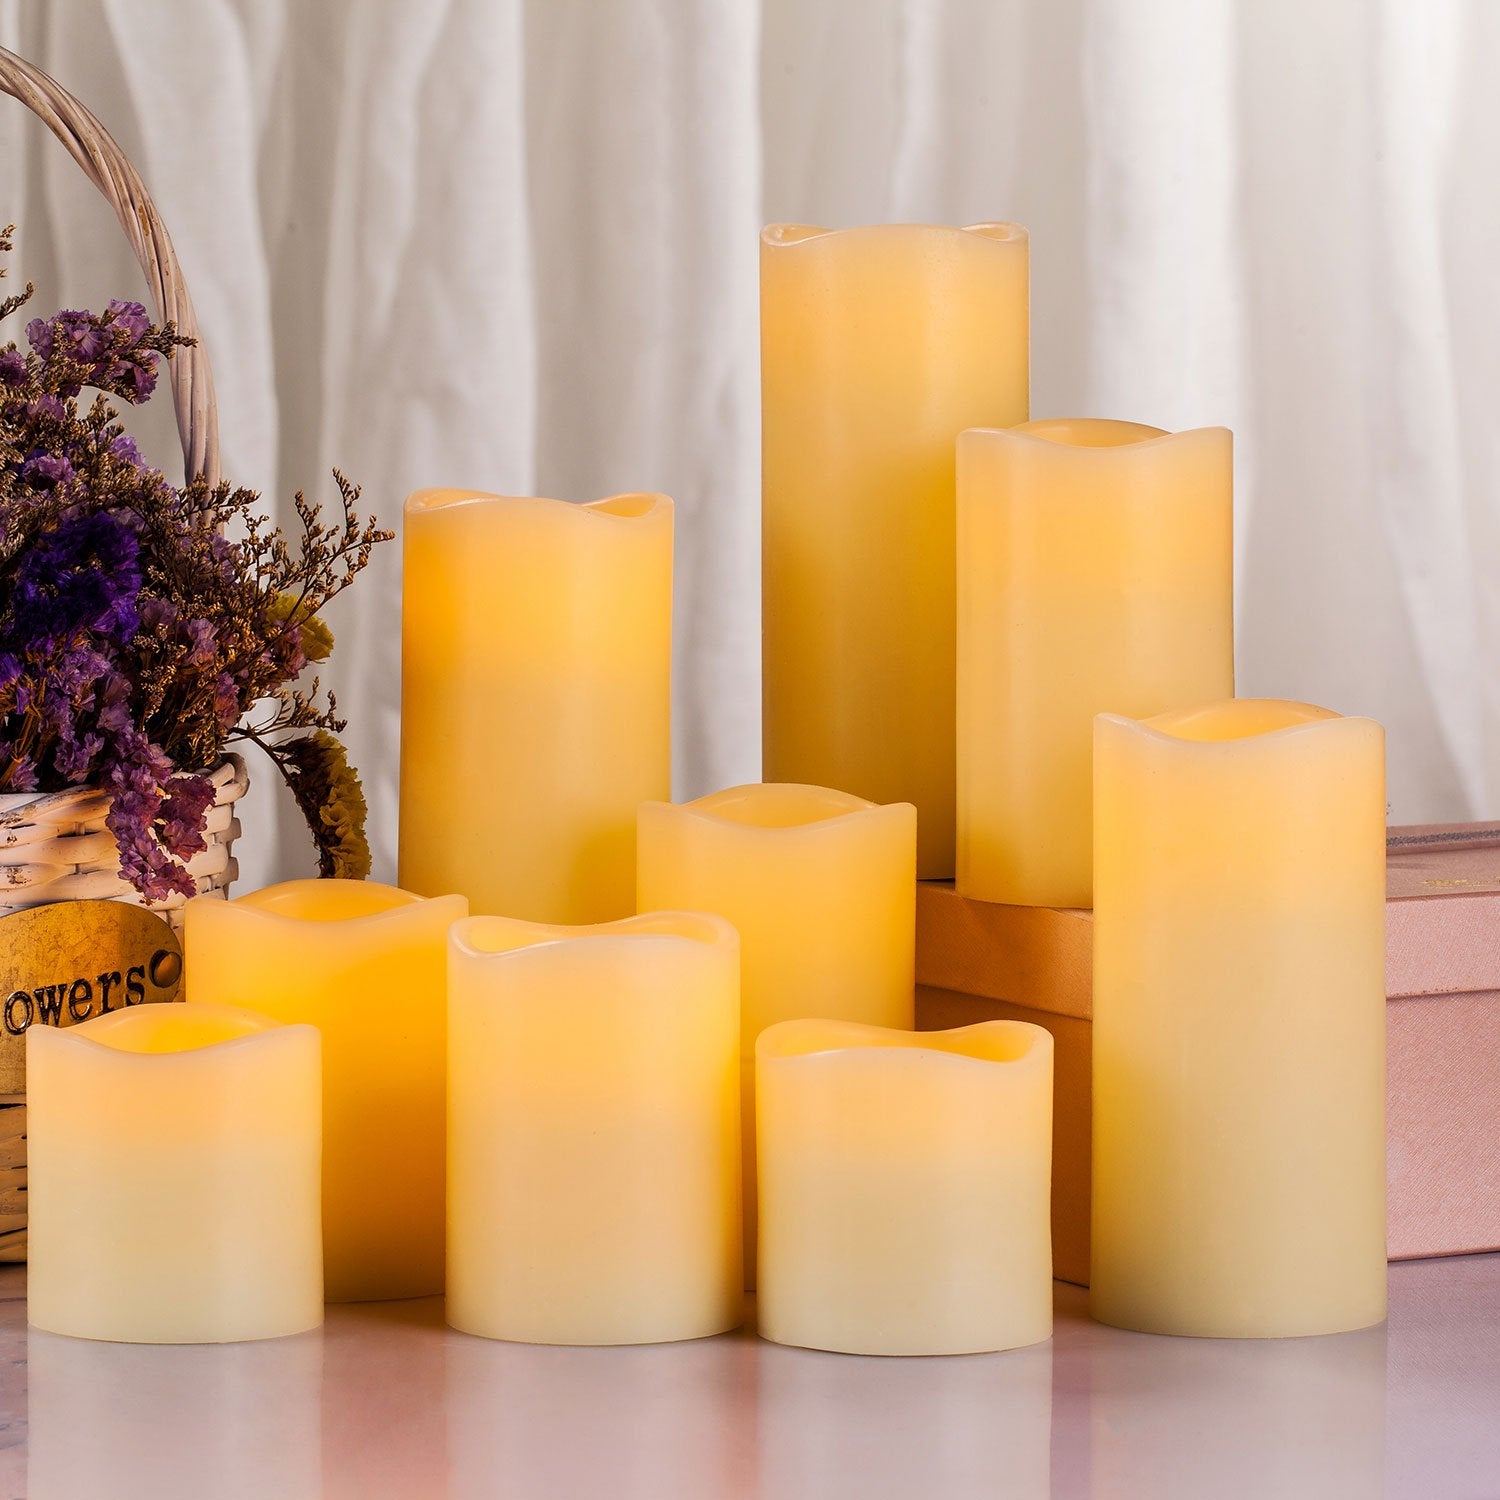 Ry-king 4 5 6 7 8 9 Pillar Flickering Flameless LED Candles with 10-key Remote Timer, Set of 9 by RY